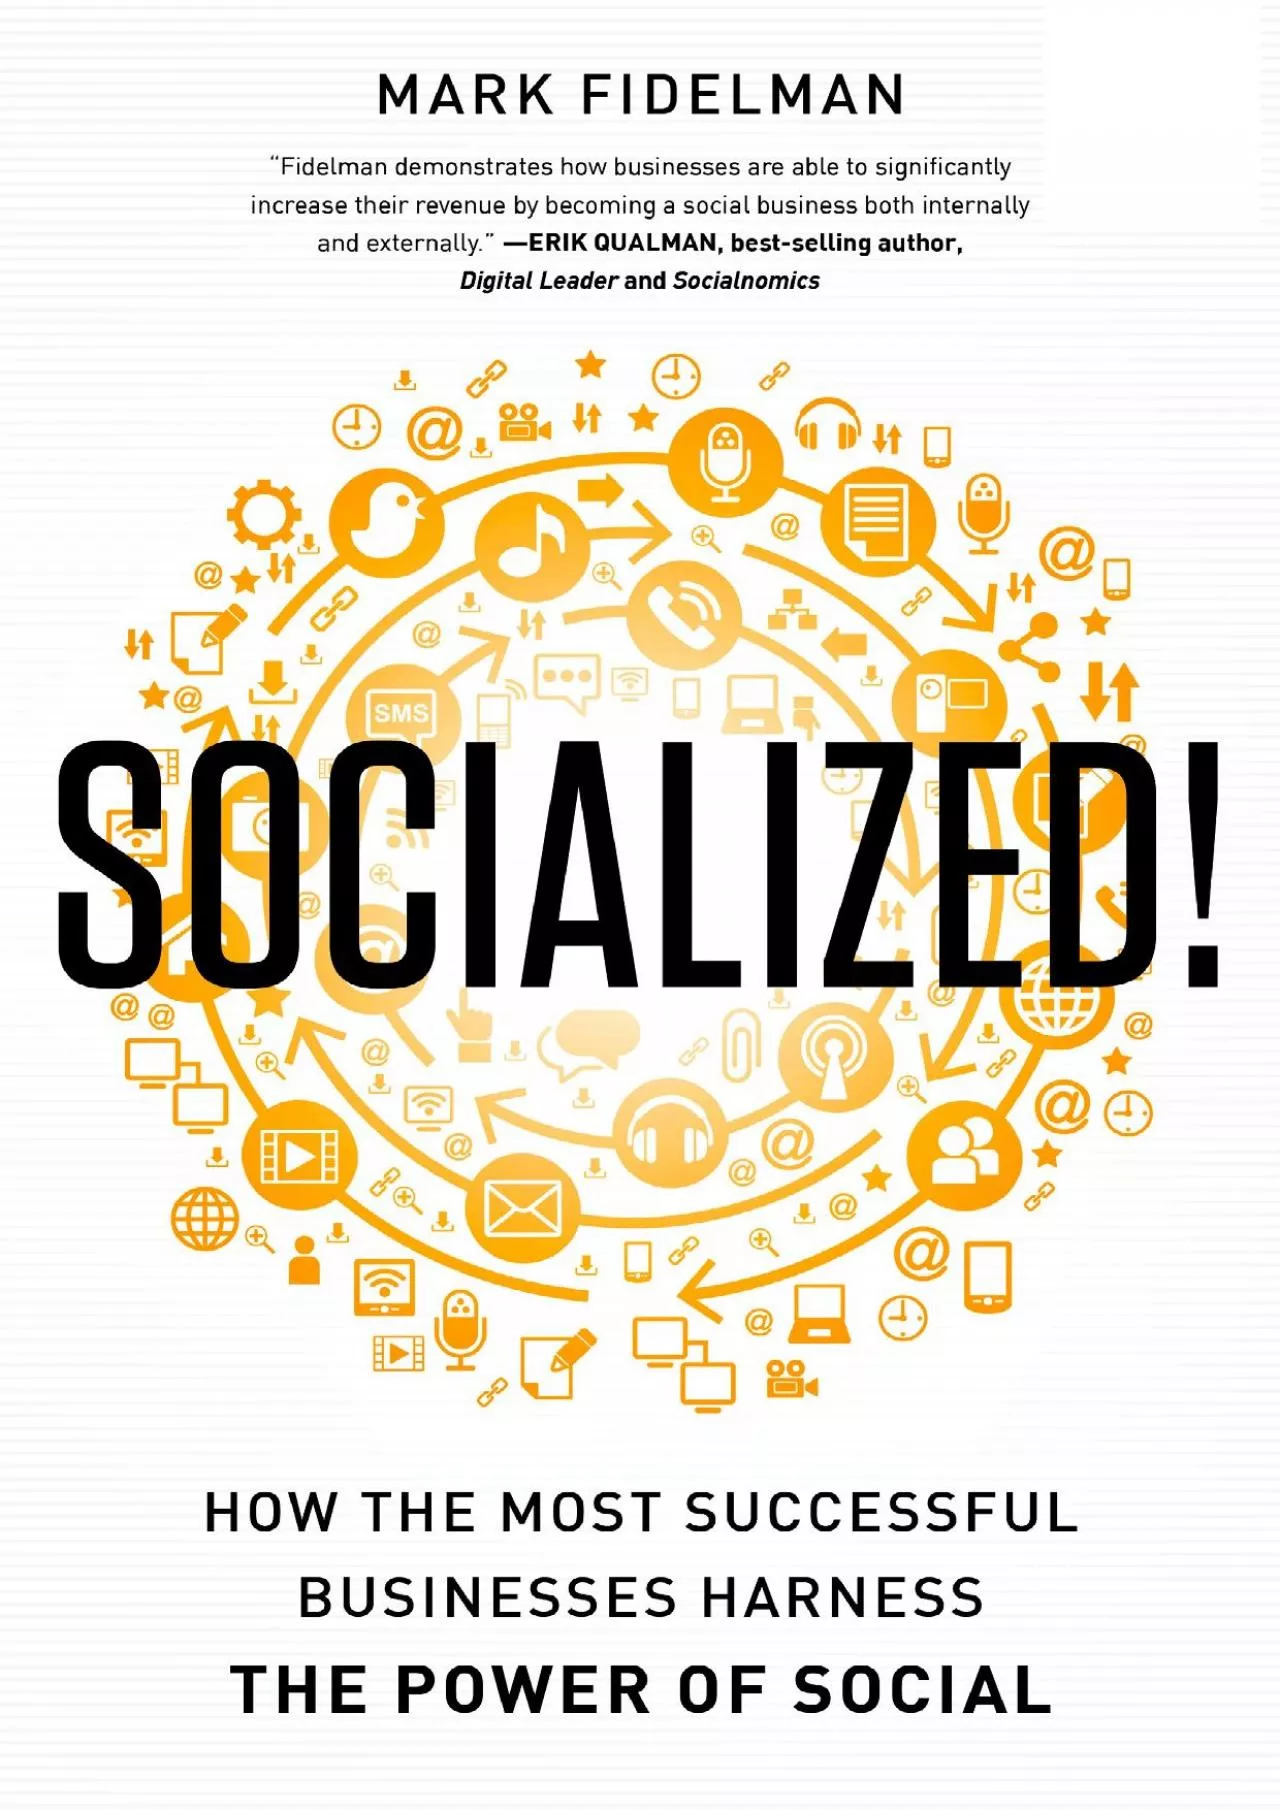 Socialized: How the Most Successful Businesses Harness the Power of Social